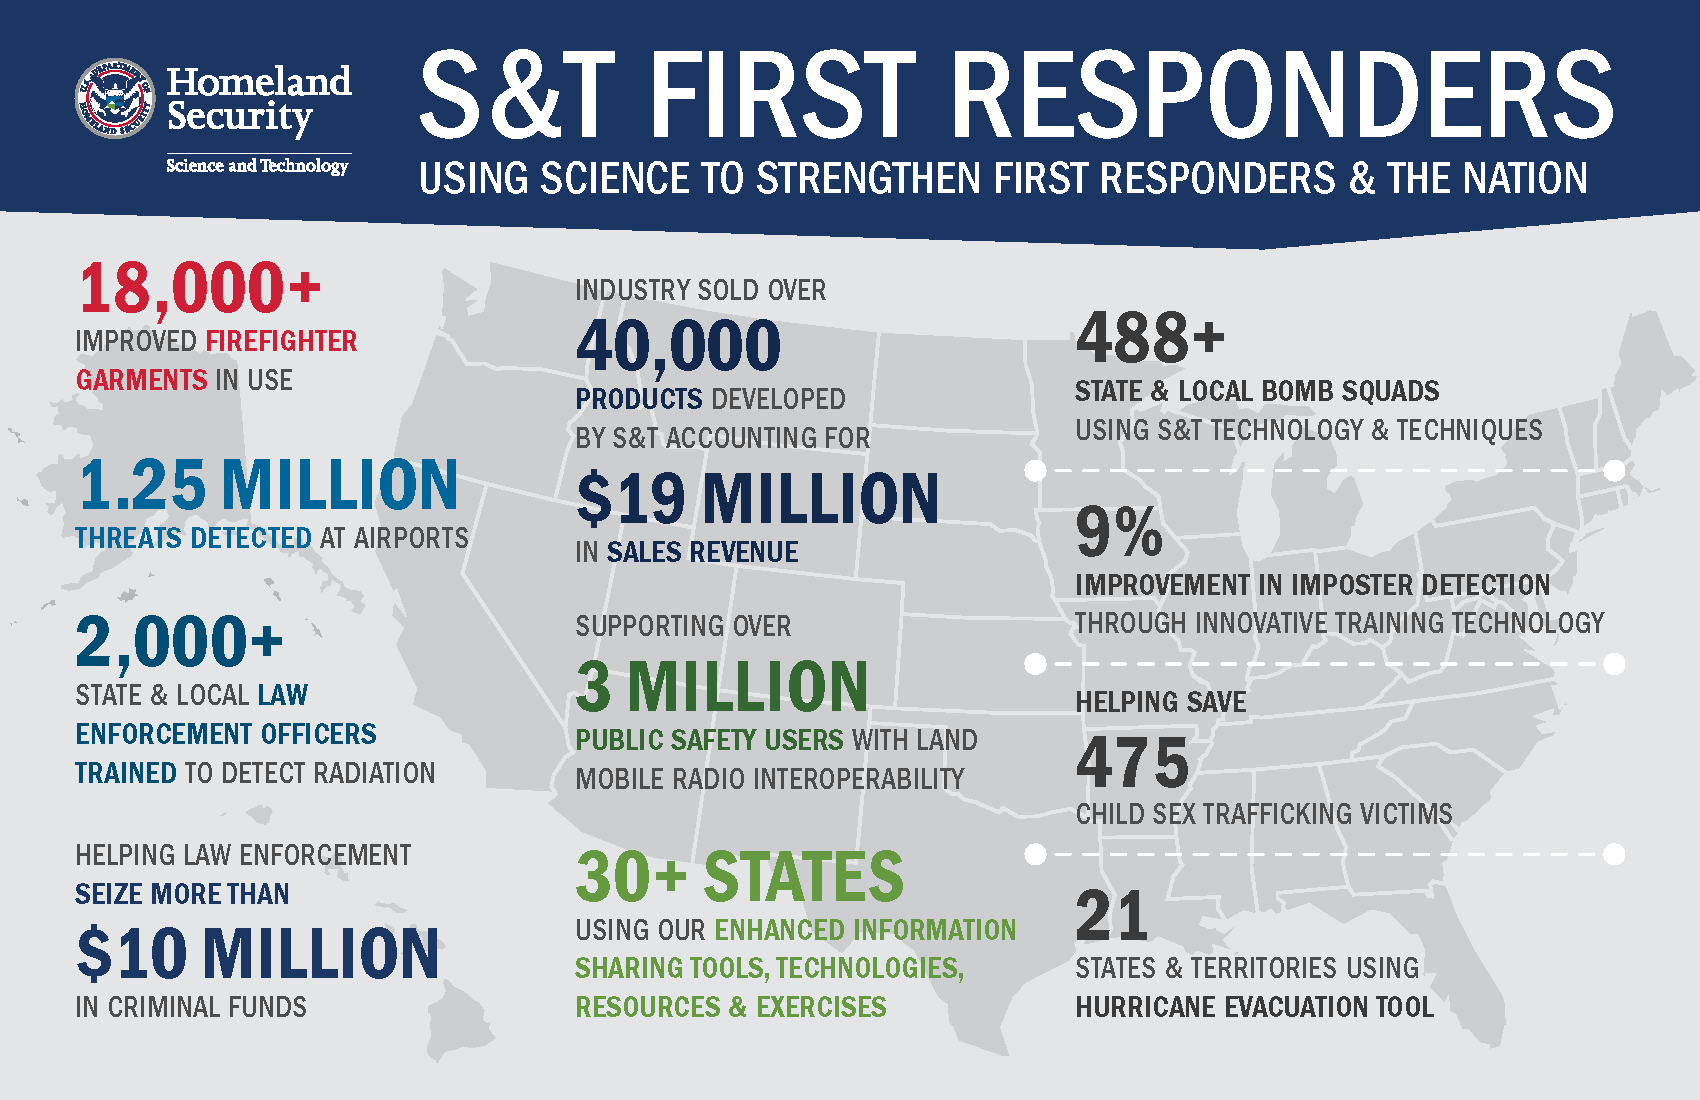 S&T First Responders. Using science to strengthen first responders and the nation. 18,000+ Improved firefighter garments. 1.25 https://communities.firstresponder.gov/web/guestmillion threats detected. 2,000+ state and local law enforcement officers trained to detect radiation. Helping law enforcement seize more than $10 million in criminal funds. Industry sold over 40,000 products developed by S&T accounting for $19 Million in sales revenue. Supporting over 3 million public safety users with and mobile radio interoperability. 30+ states using our enhanced information sharing tools, technologies, resources & exercises.488+ state and local bomb squads using S&T technology and techniques. 9% improvement in imposter detection through innovative training technology. Helping safe 475 child sex trafficking victims. 21 state and terrirtories using hurricane evacuation tool. 